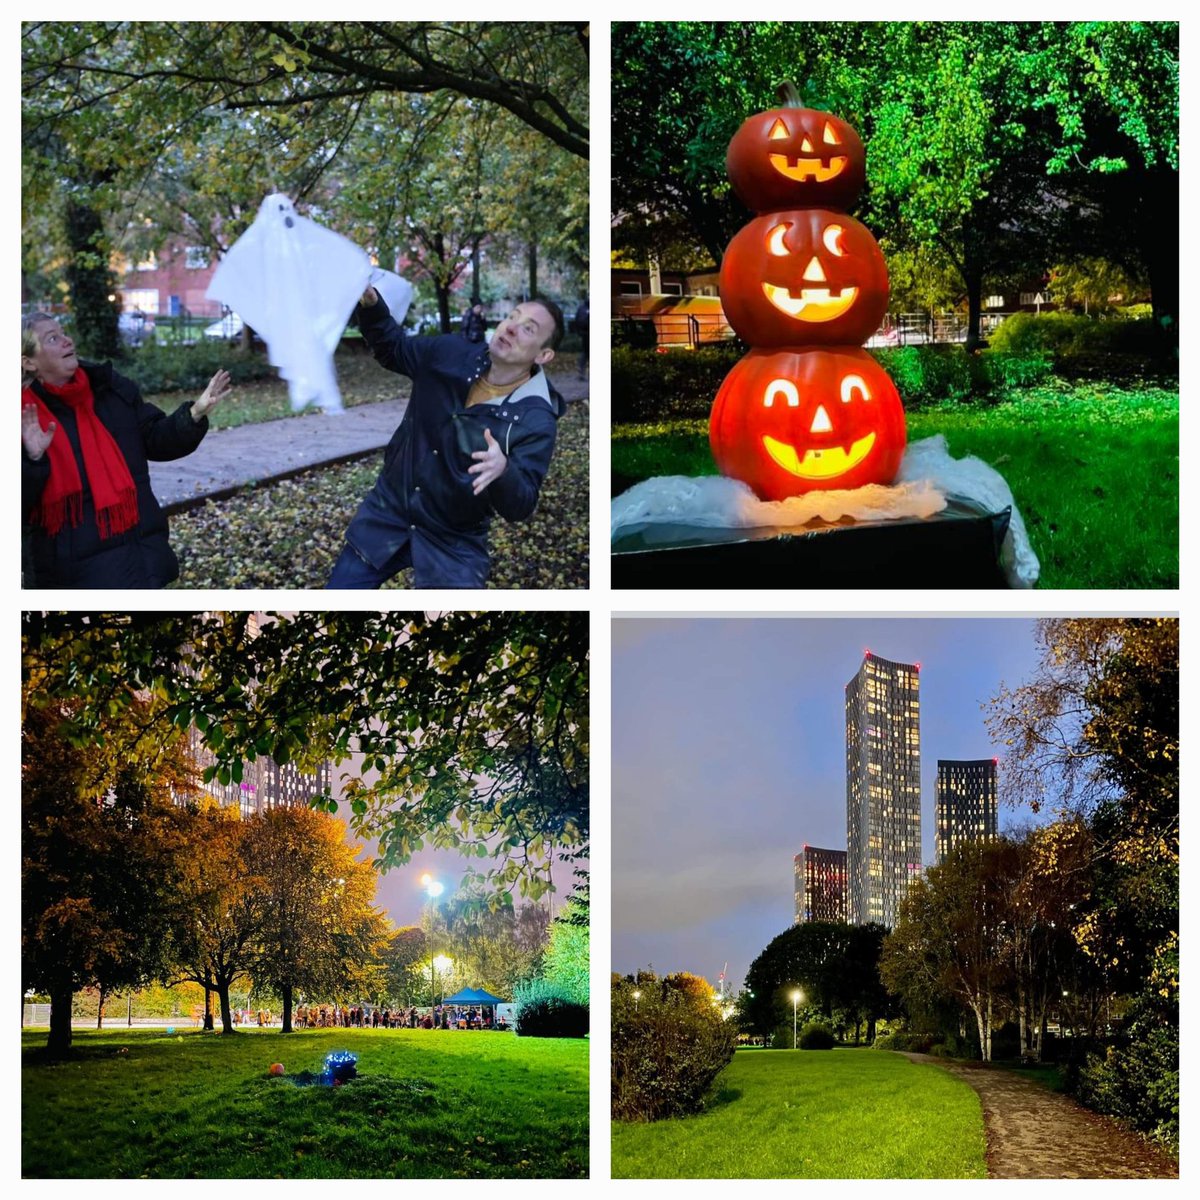 Great halloween event in @HulmeParks. Pictures are amazing, only background in the city like that. Thank to Leah Whitehouse @parks_great @MCCHulme @AnnetteWright @Lee4Hulme @ky1iew thanks to everyone involved